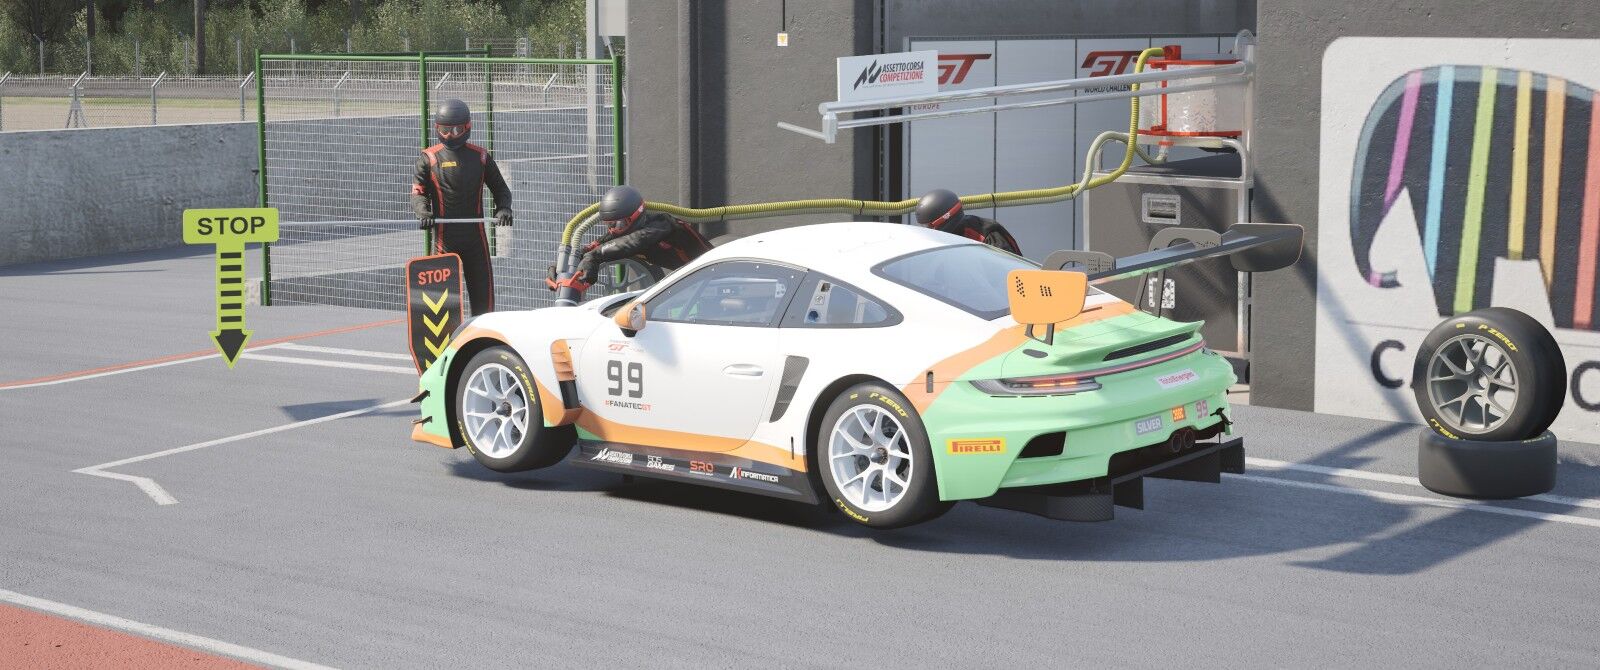 A Porsche racecar in the OverTake colours white, teal and orange.